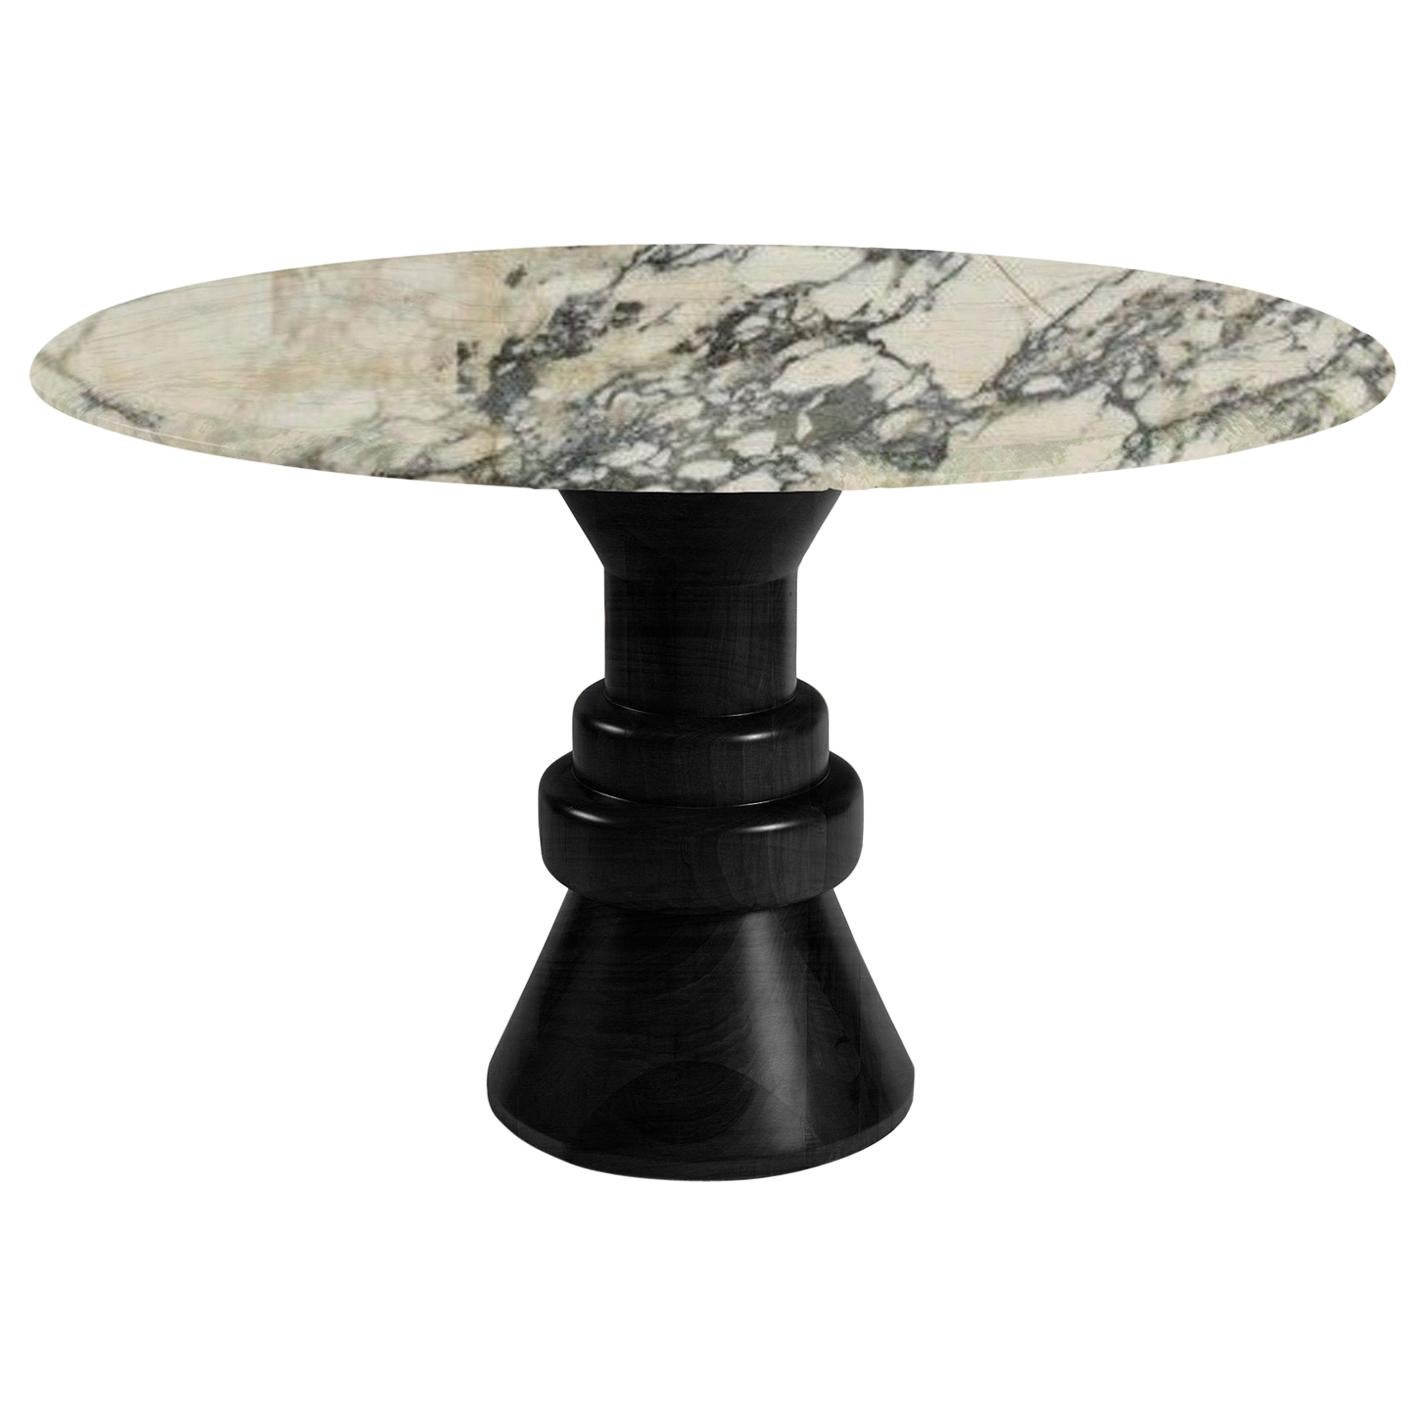 21st Century Cream Marble Round Dining Table with Sculptural Black Wooden Base